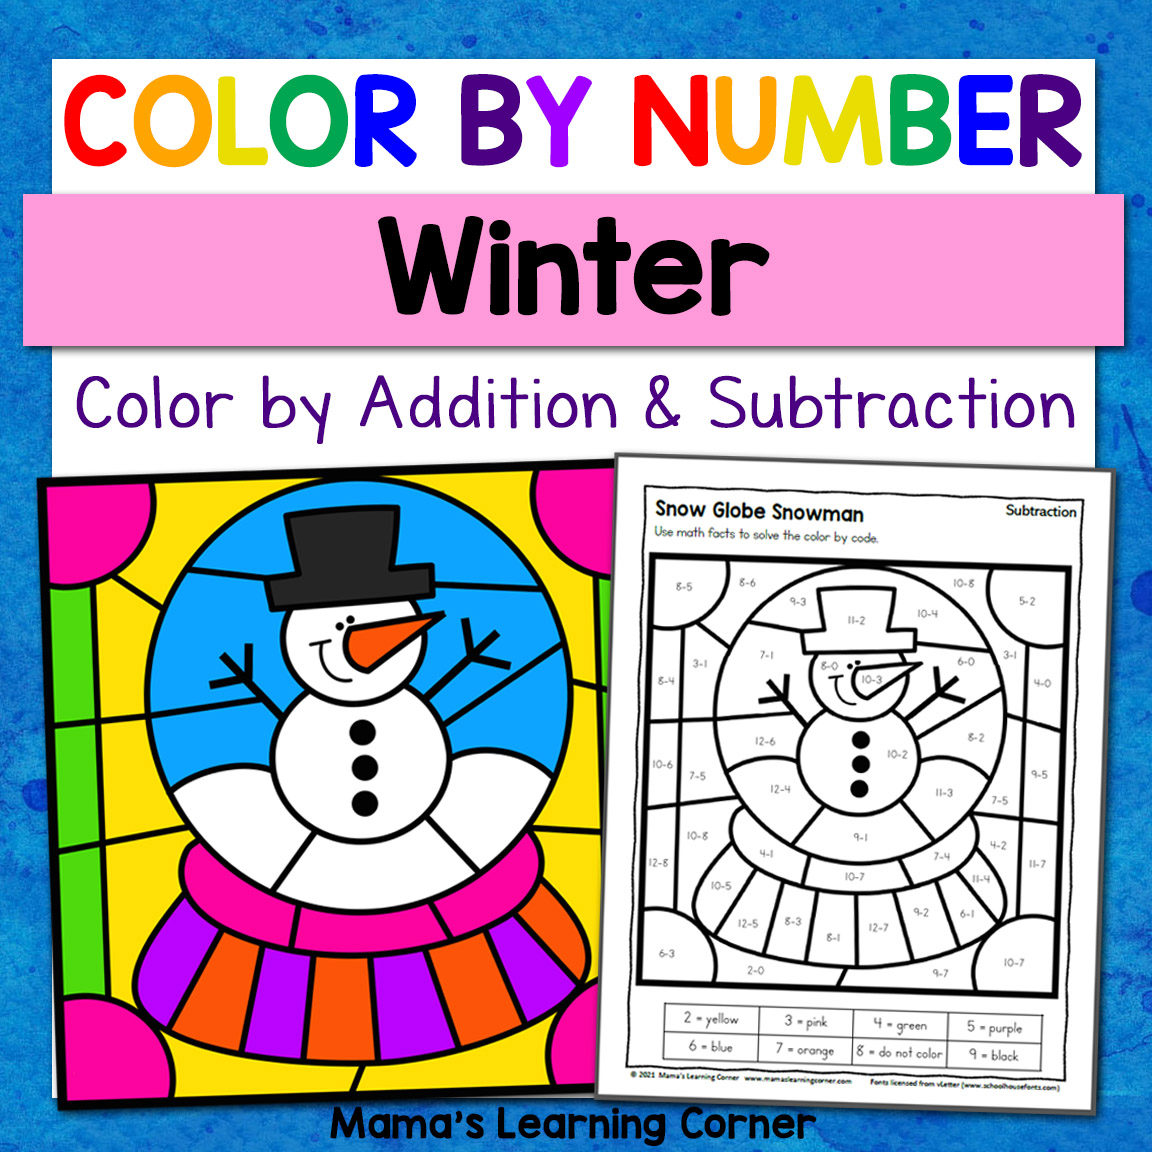 Winter color by addition and subtraction worksheets